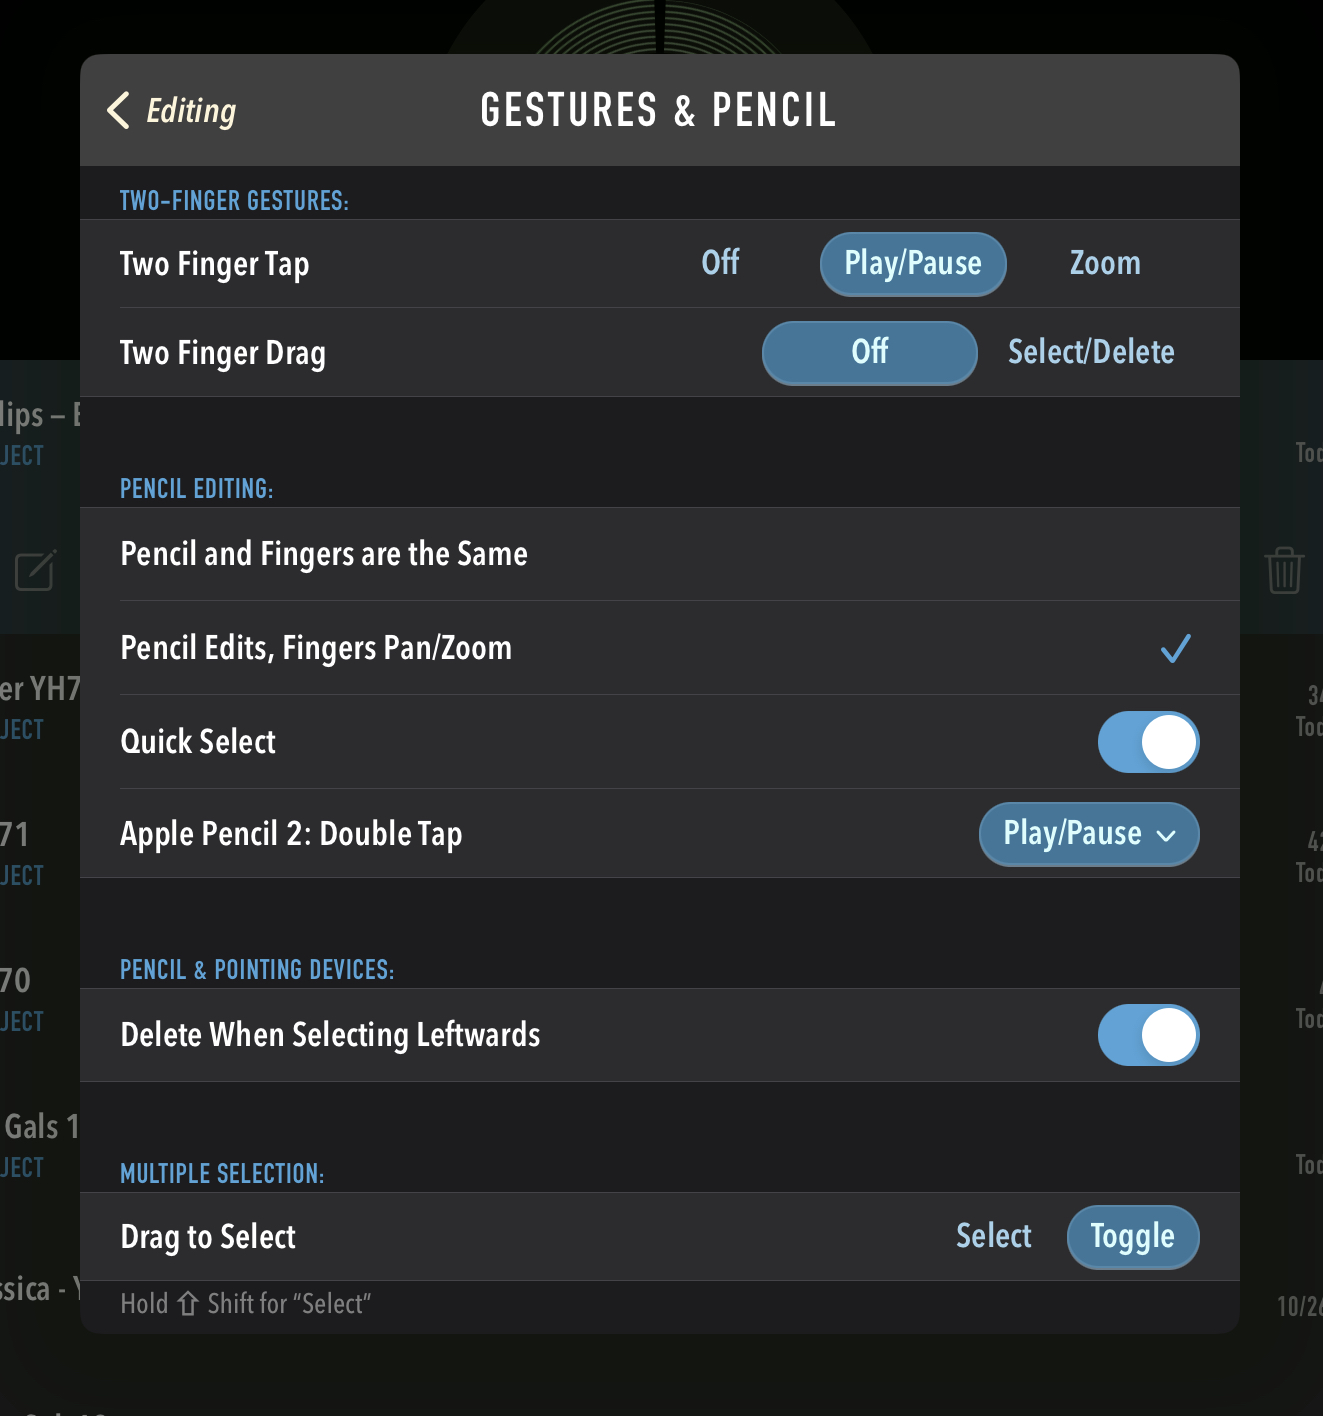 Ferrite’s “Gesture & Pencil” setting screen displaying toggles for various features under Two-Finger Gestures, Pencil Editing, Pencil & Pointing Devices, and Multiple Selection